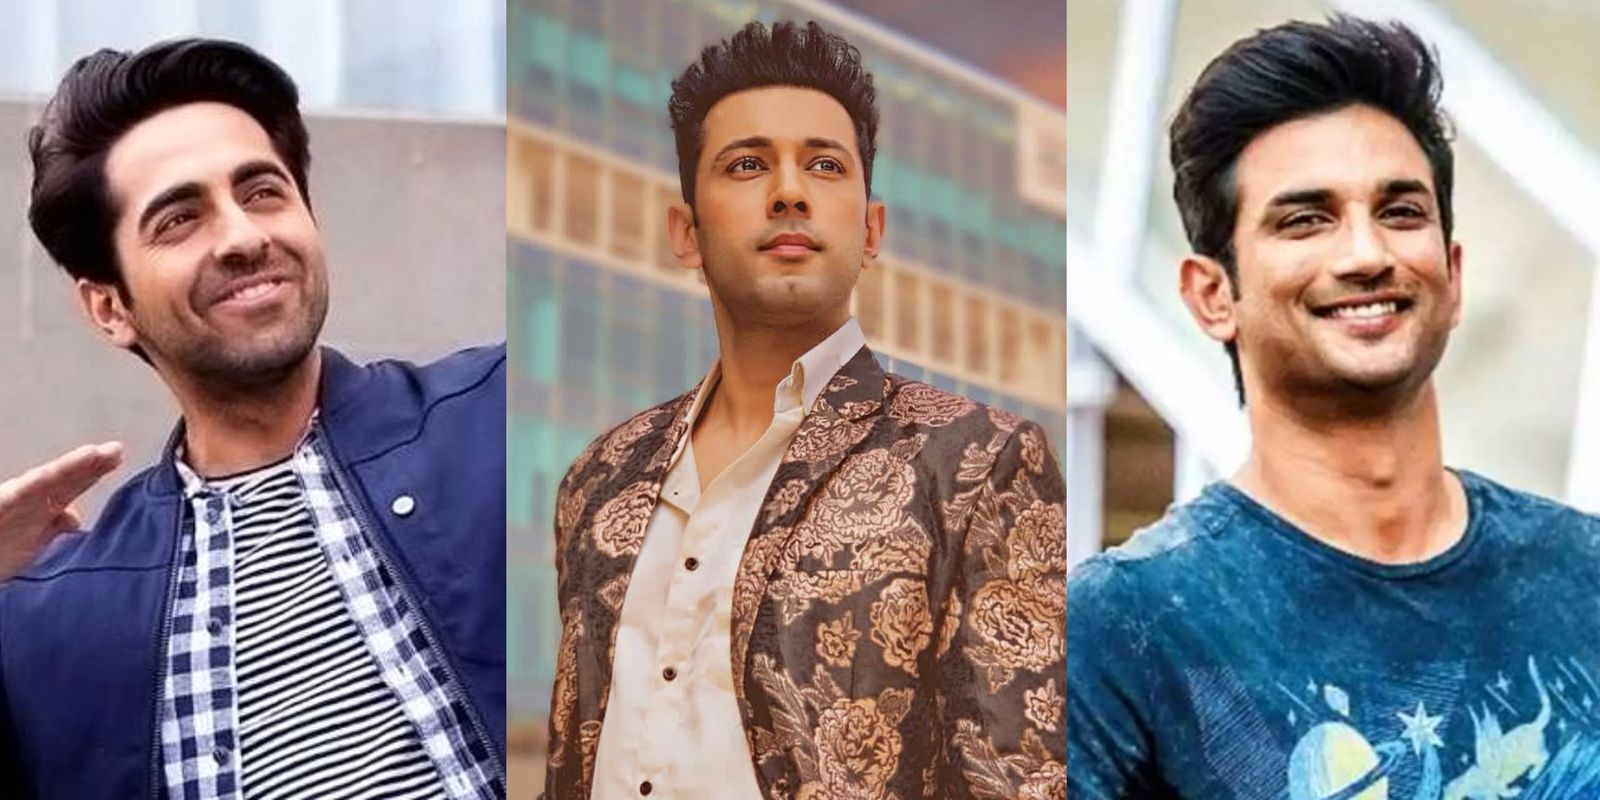 Student Of The Year Actor Sahil Anand On Nepotism: “Only Ayushmann And Sushant From Outside Had Made It Big”